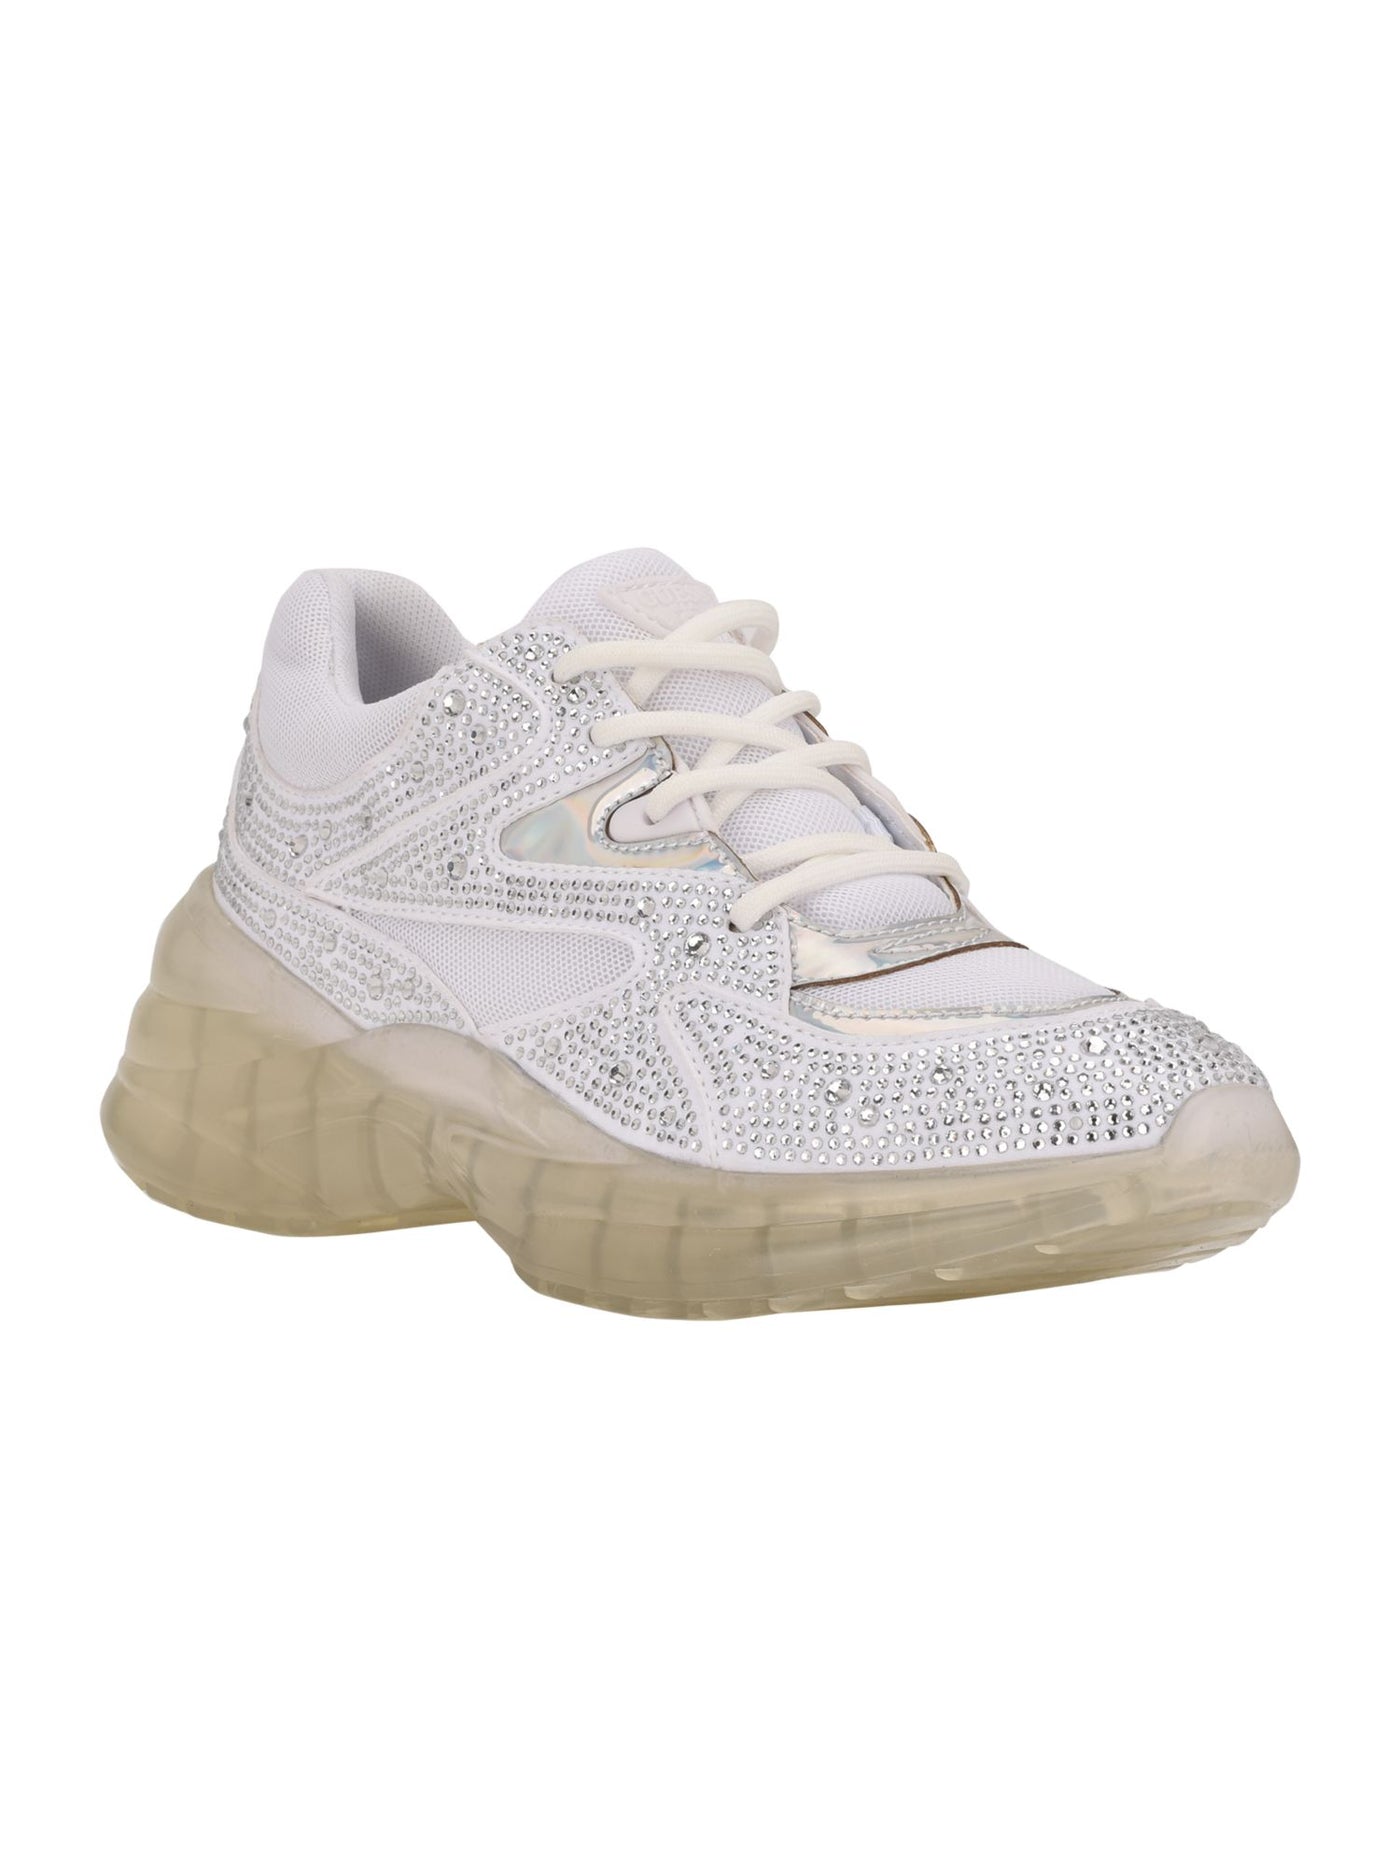 GUESS Womens White Comfort Holographic Removable Insole Rhinestone Circa Round Toe Wedge Lace-Up Athletic Sneakers Shoes 5 M